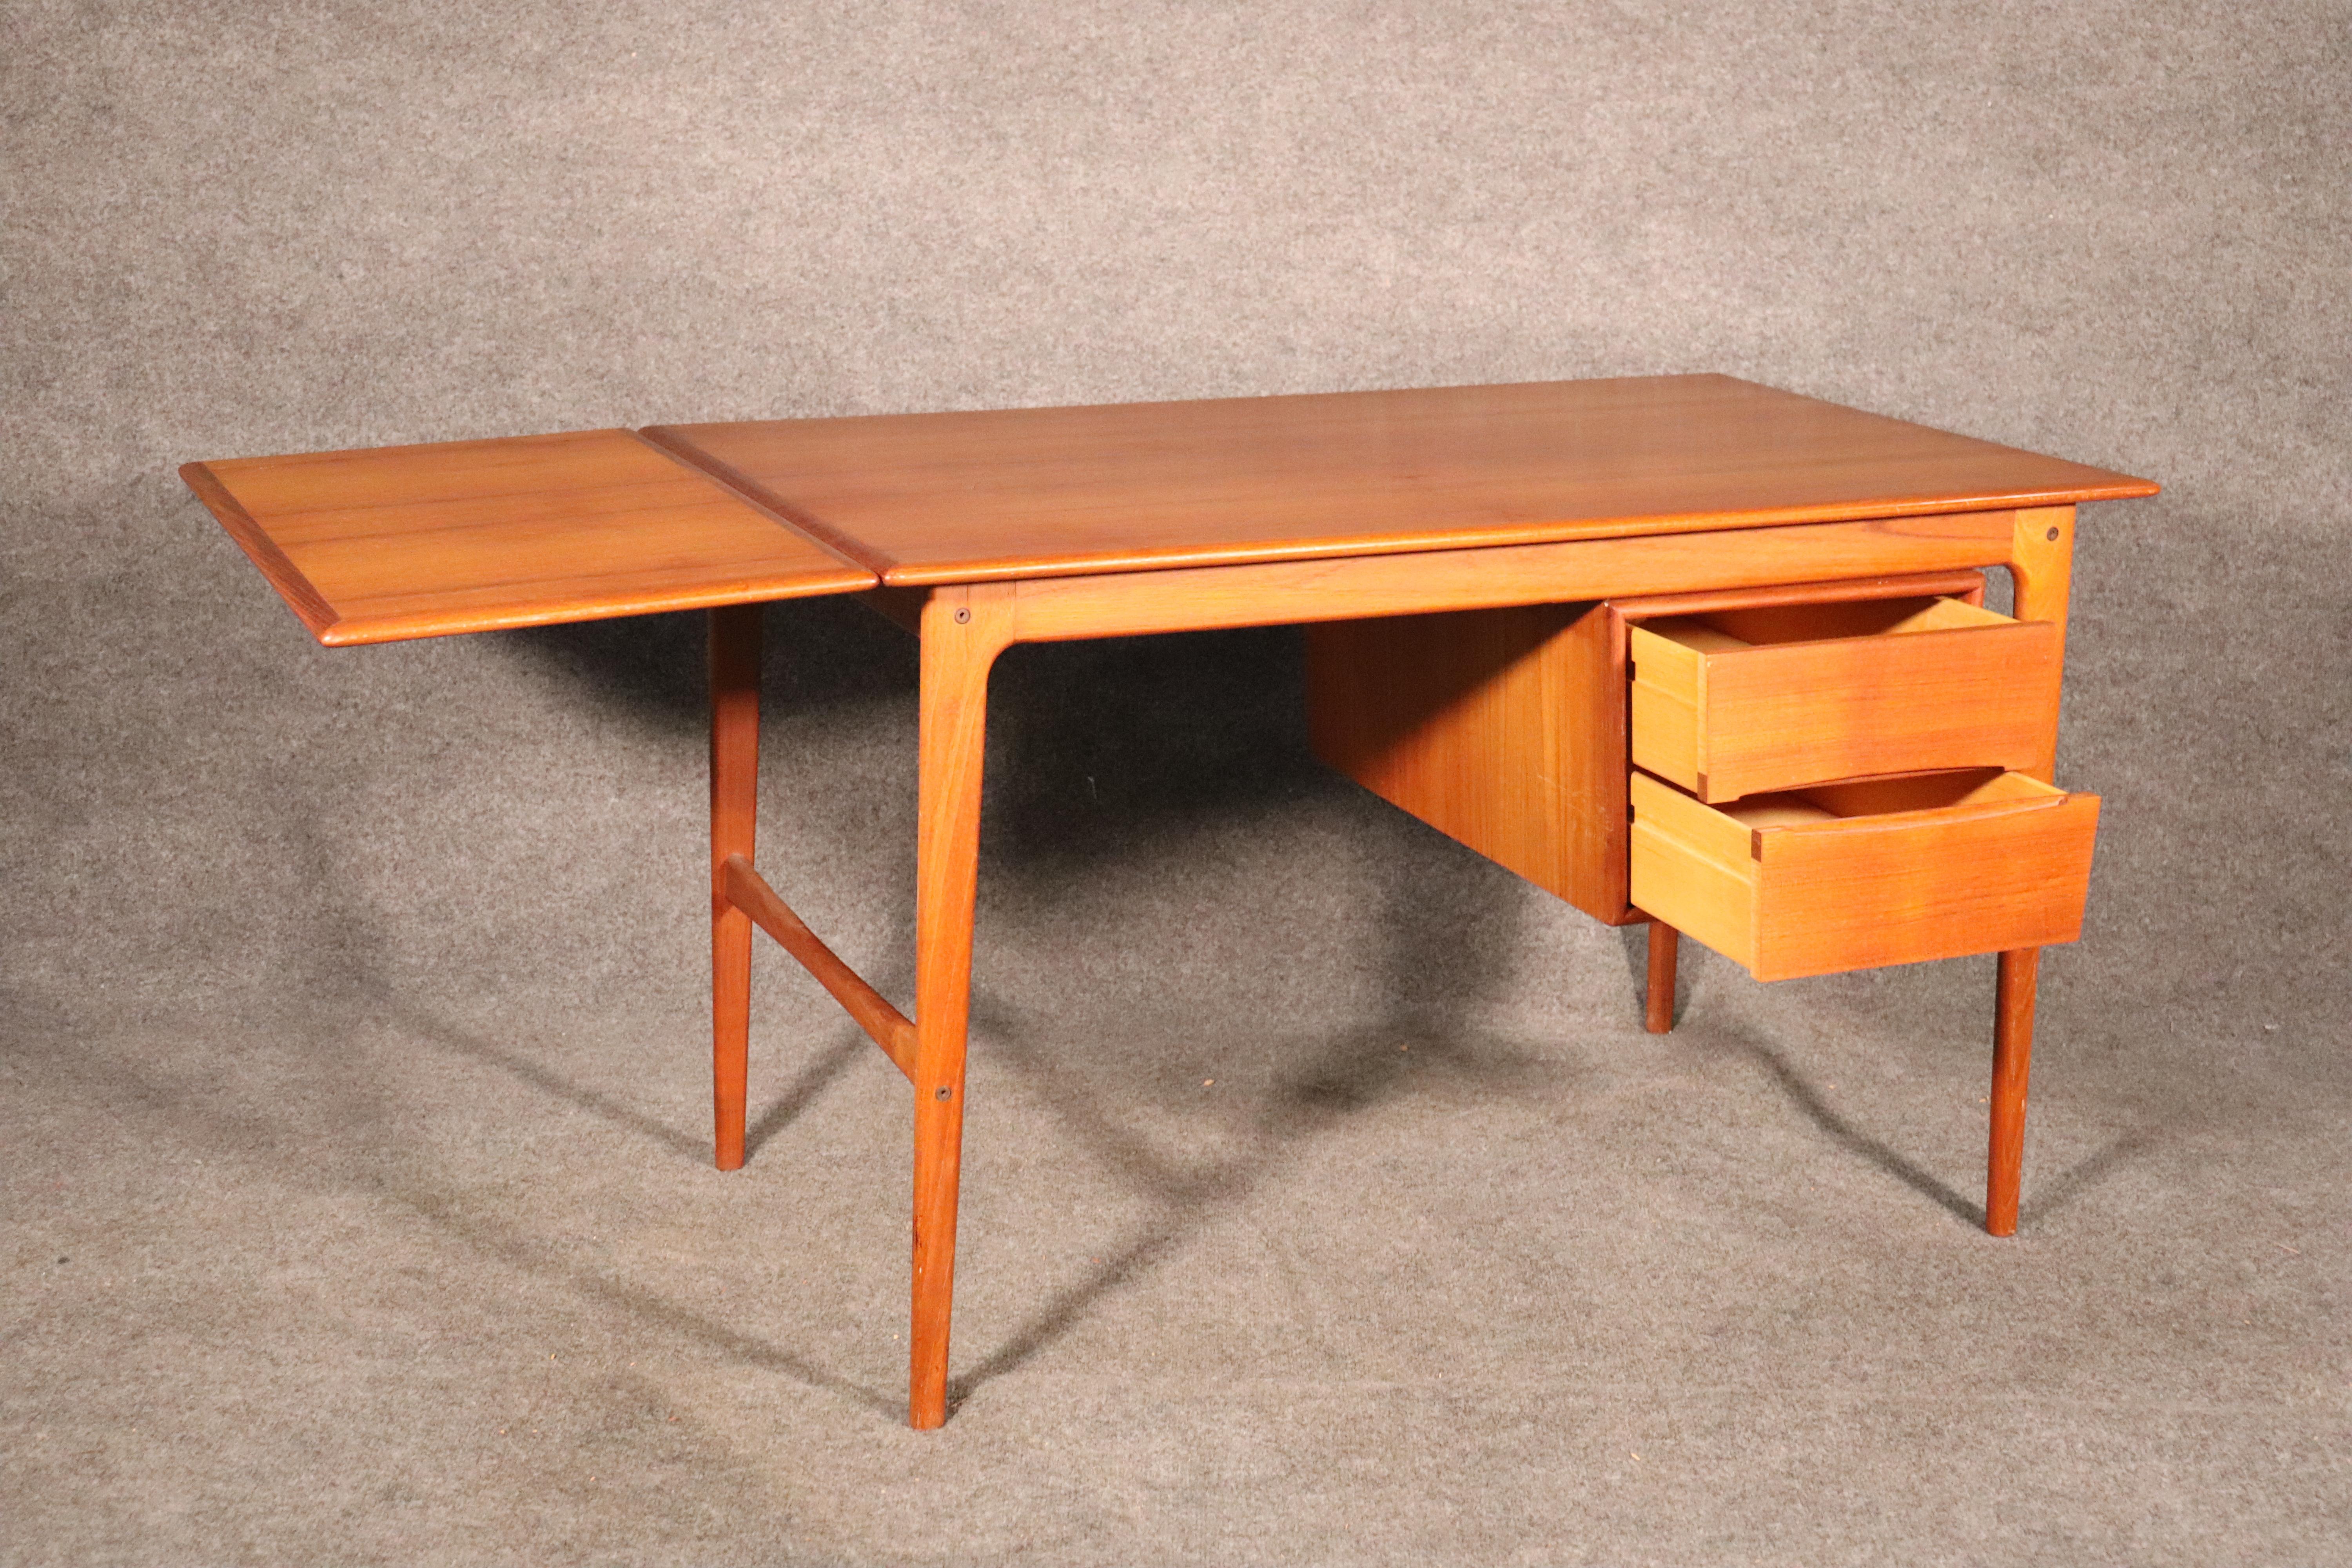 Mid-Century Modern desk from Denmark in teak wood. Space saving feature with a sliding top to extend the desk 46